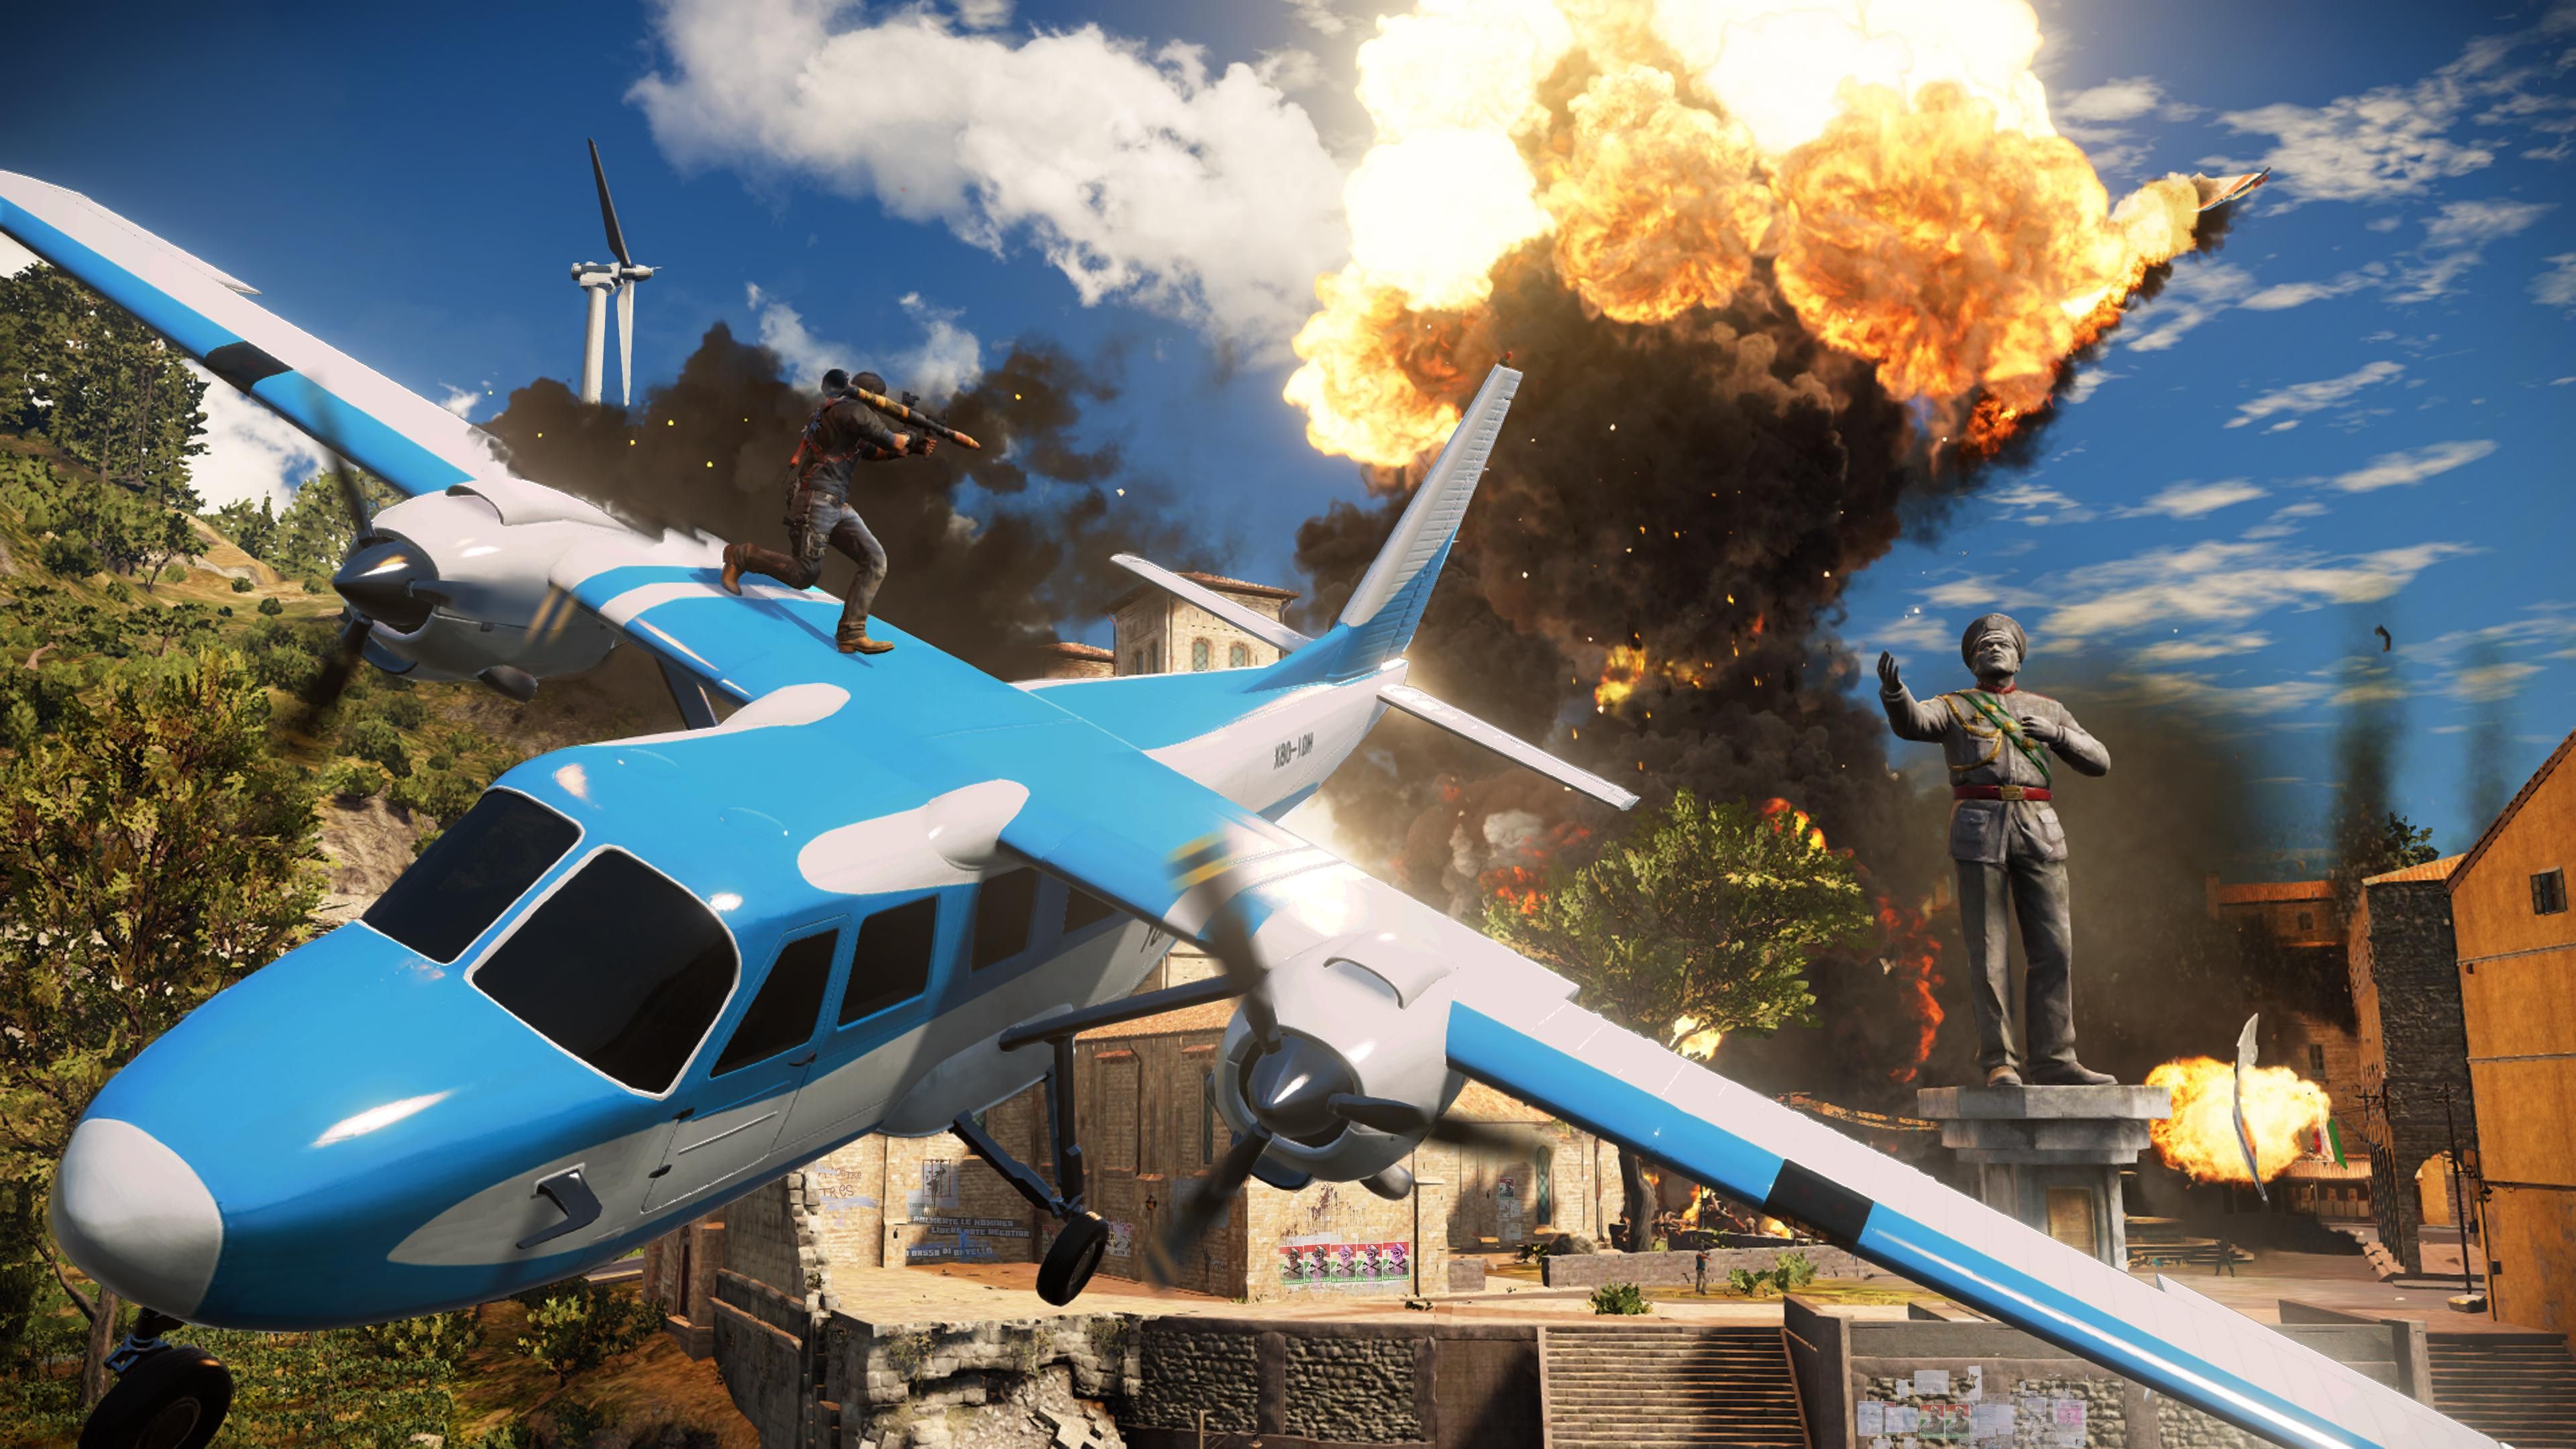 3840x2160 > Just Cause Wallpapers